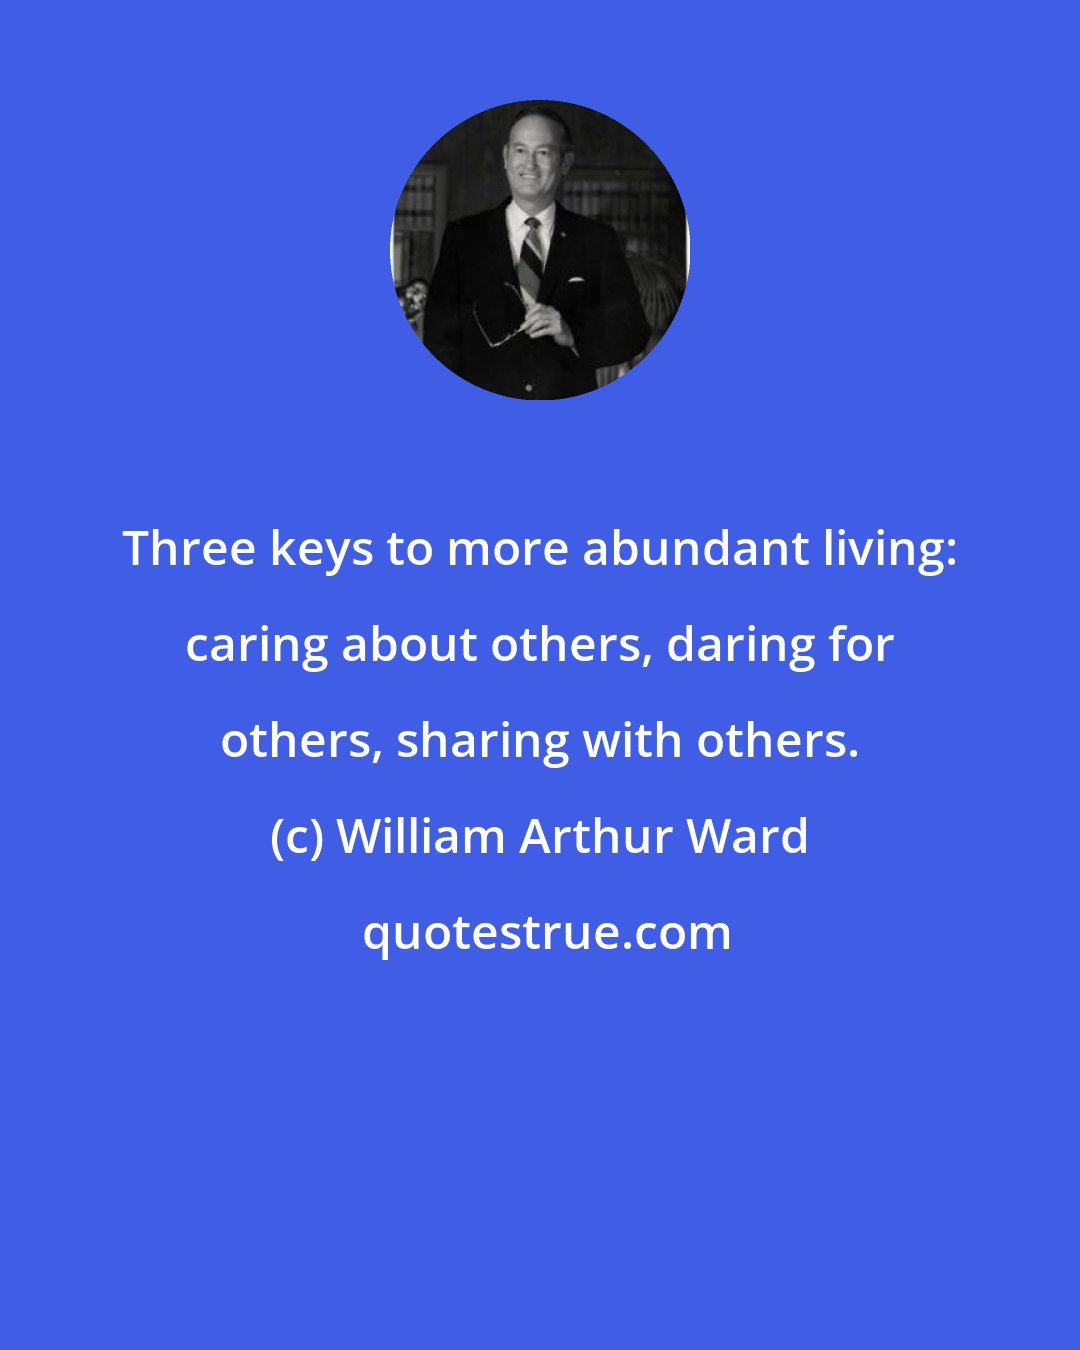 William Arthur Ward: Three keys to more abundant living: caring about others, daring for others, sharing with others.